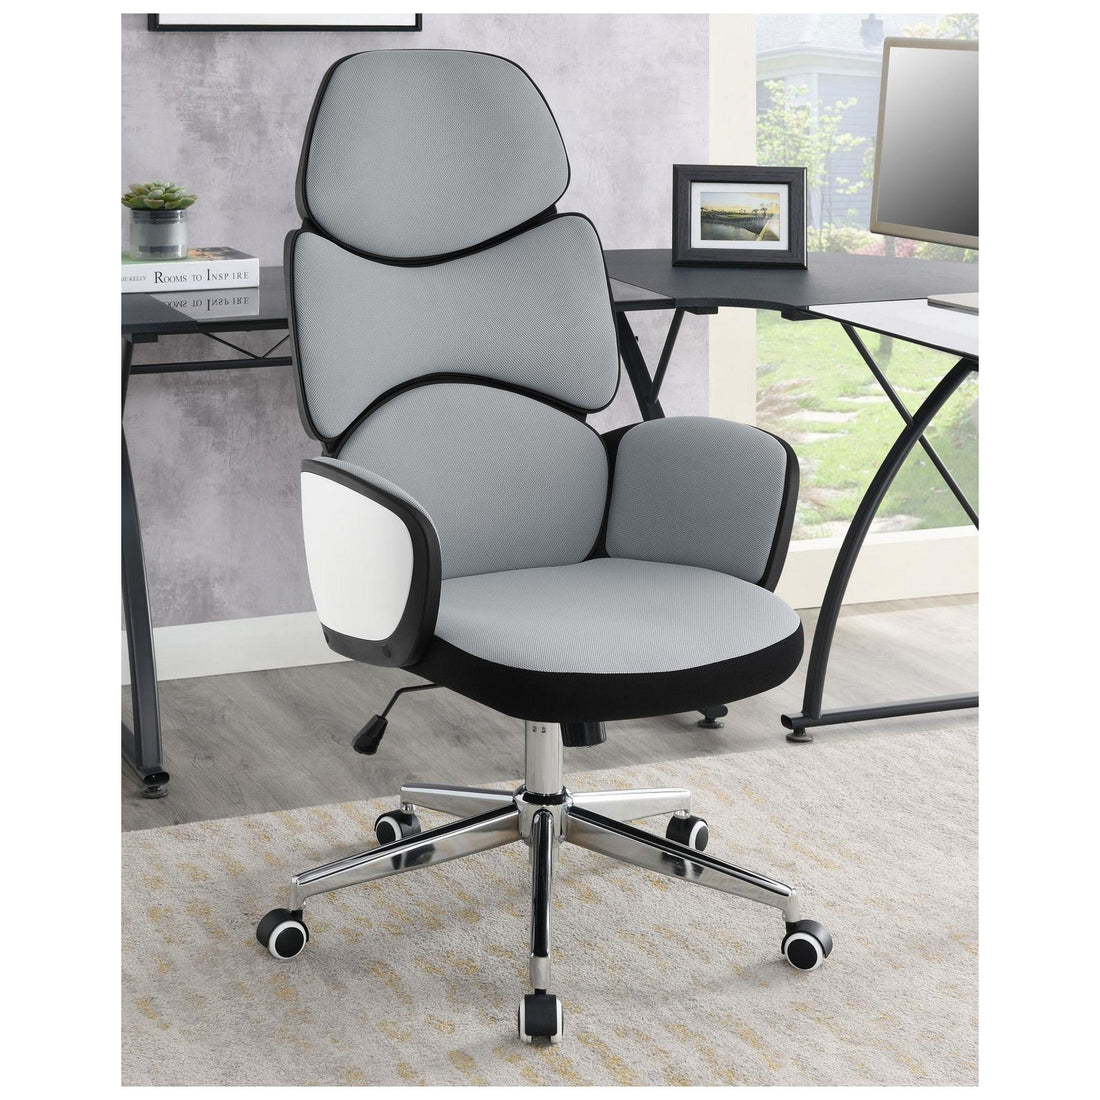 Upholstered Office Chair Light with Casters Grey and Chrome 881356